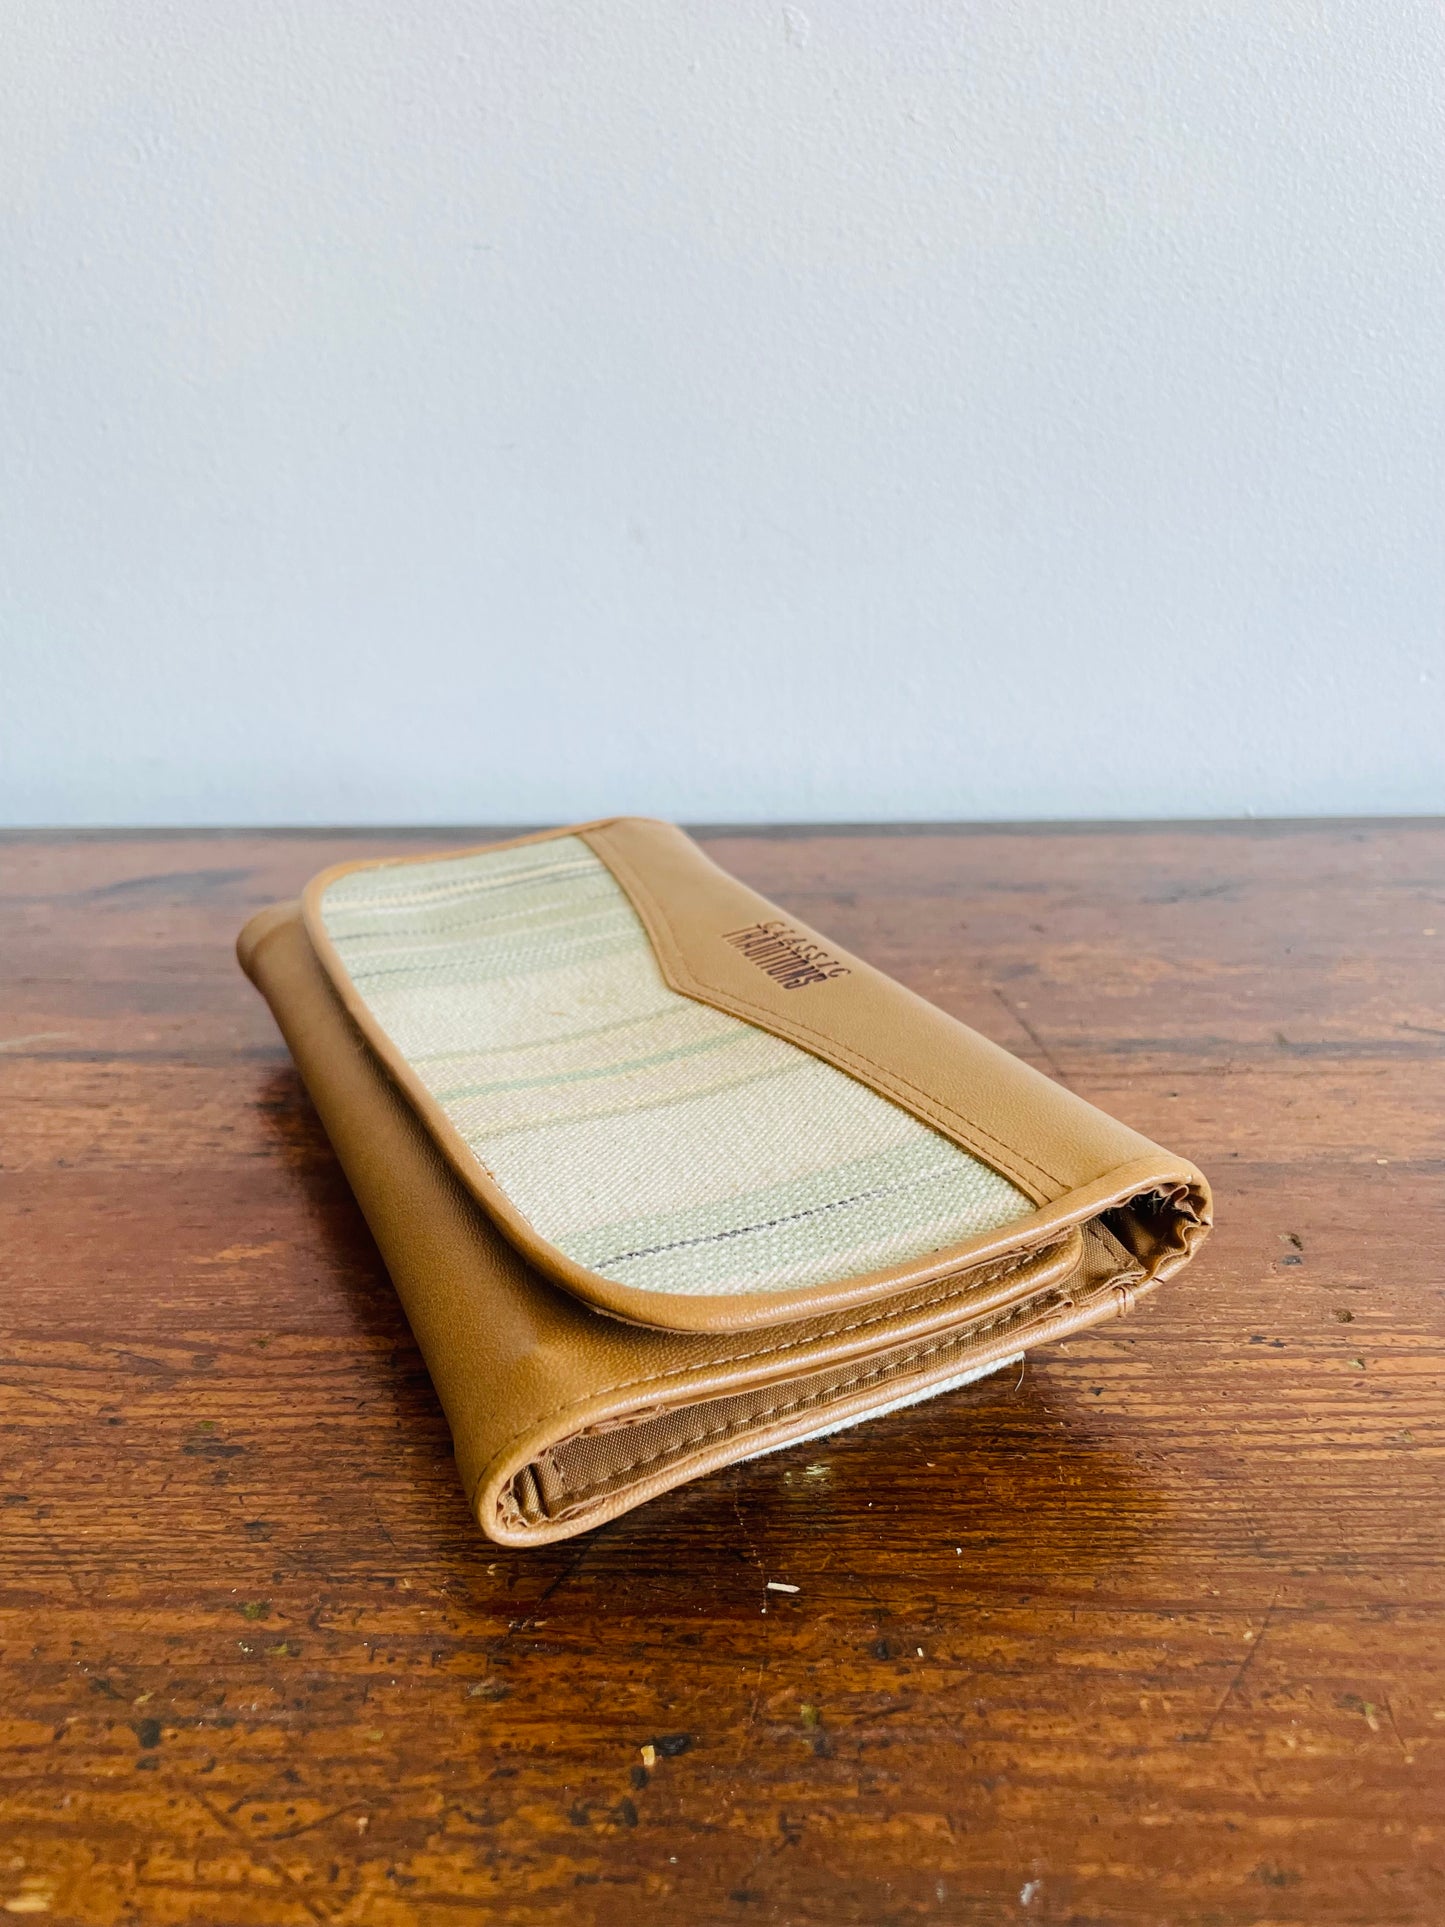 Classic Traditions Tan & Pastel Striped Wallet